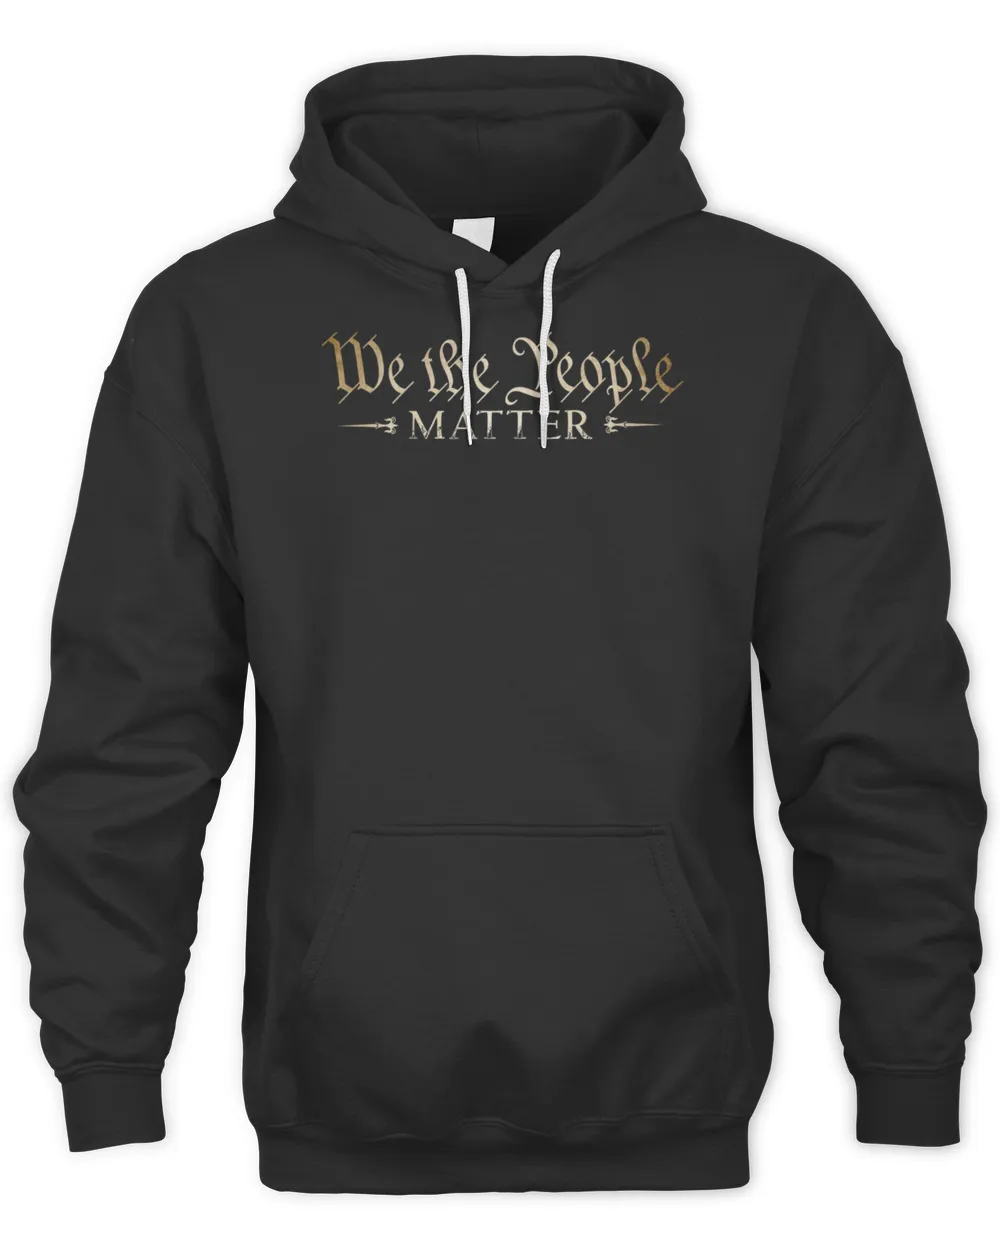 We The People Matter - US Constitution - Freedom, Liberty and Justice for ALL T-Shirt